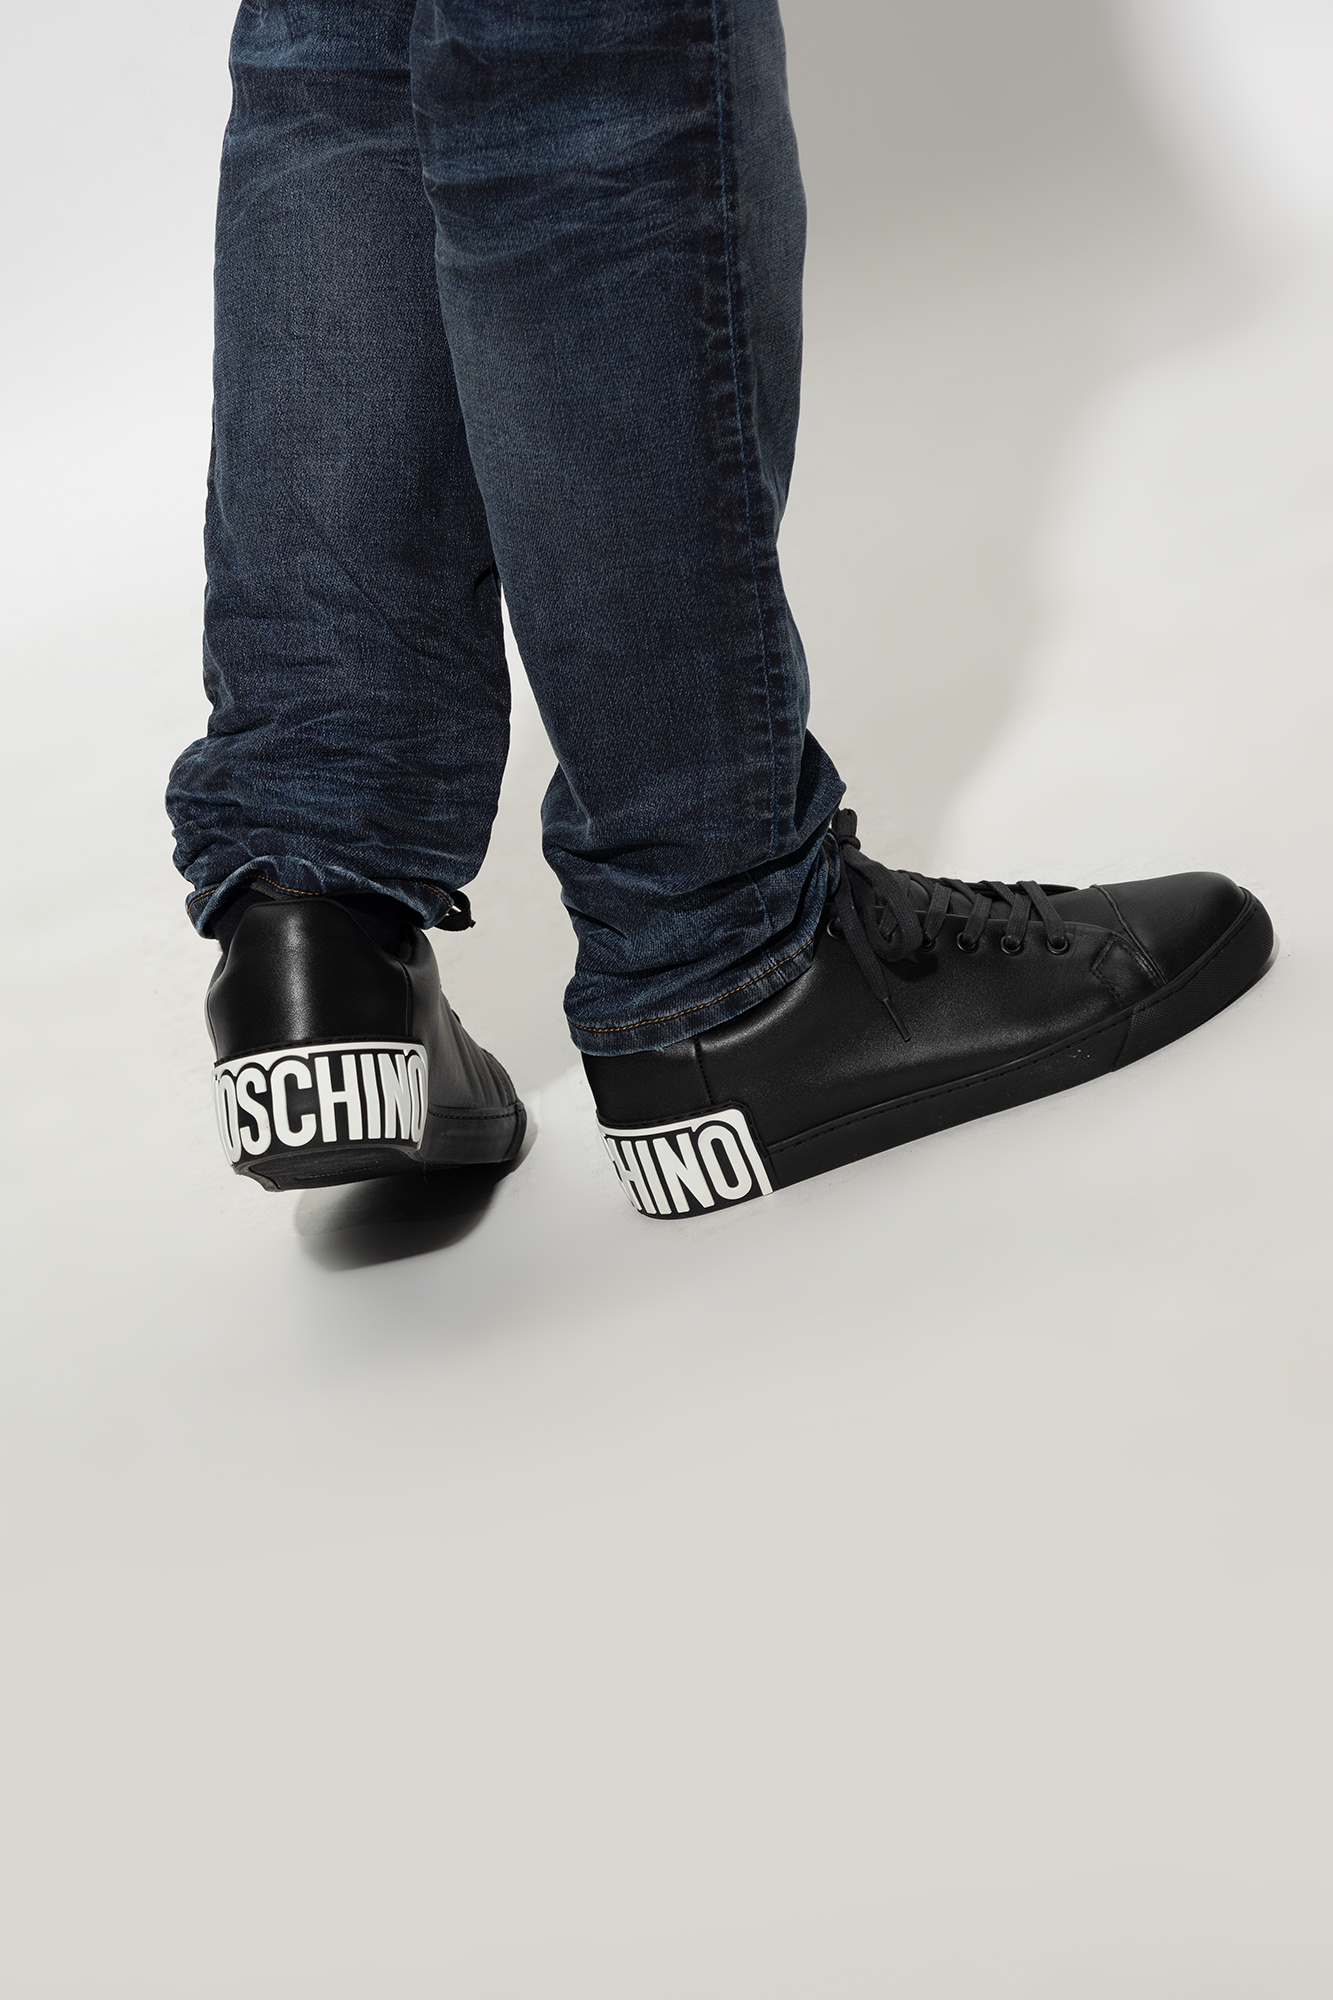 Moschino Can we call this a sneaker